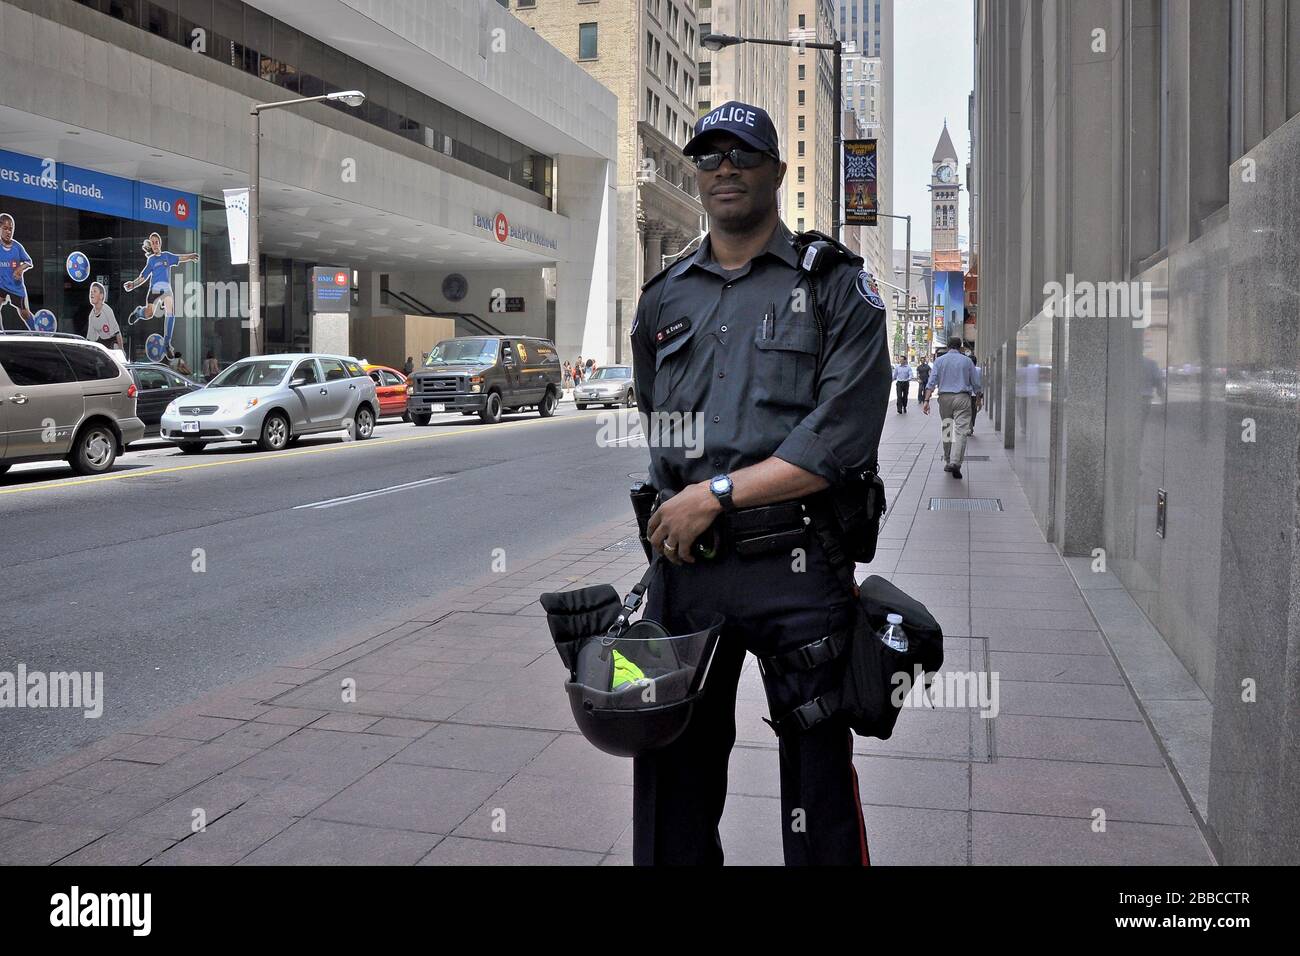 Police in full gears in downtown Toronto for the G20 summit. Stock Photo